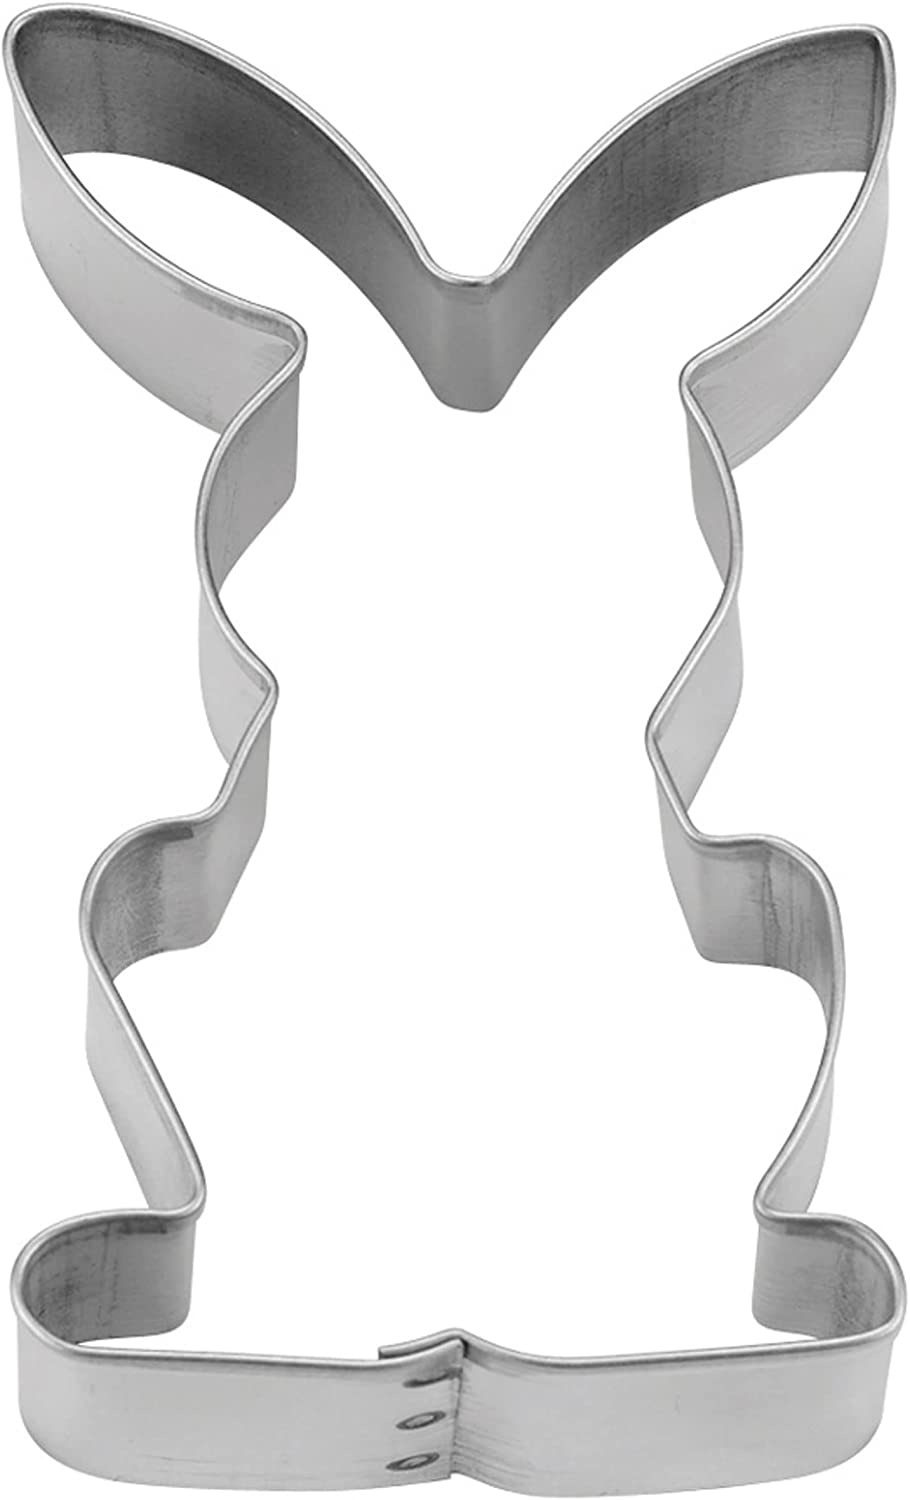 Staedter Sitting Bunny Cookie Cutter, 6 cm